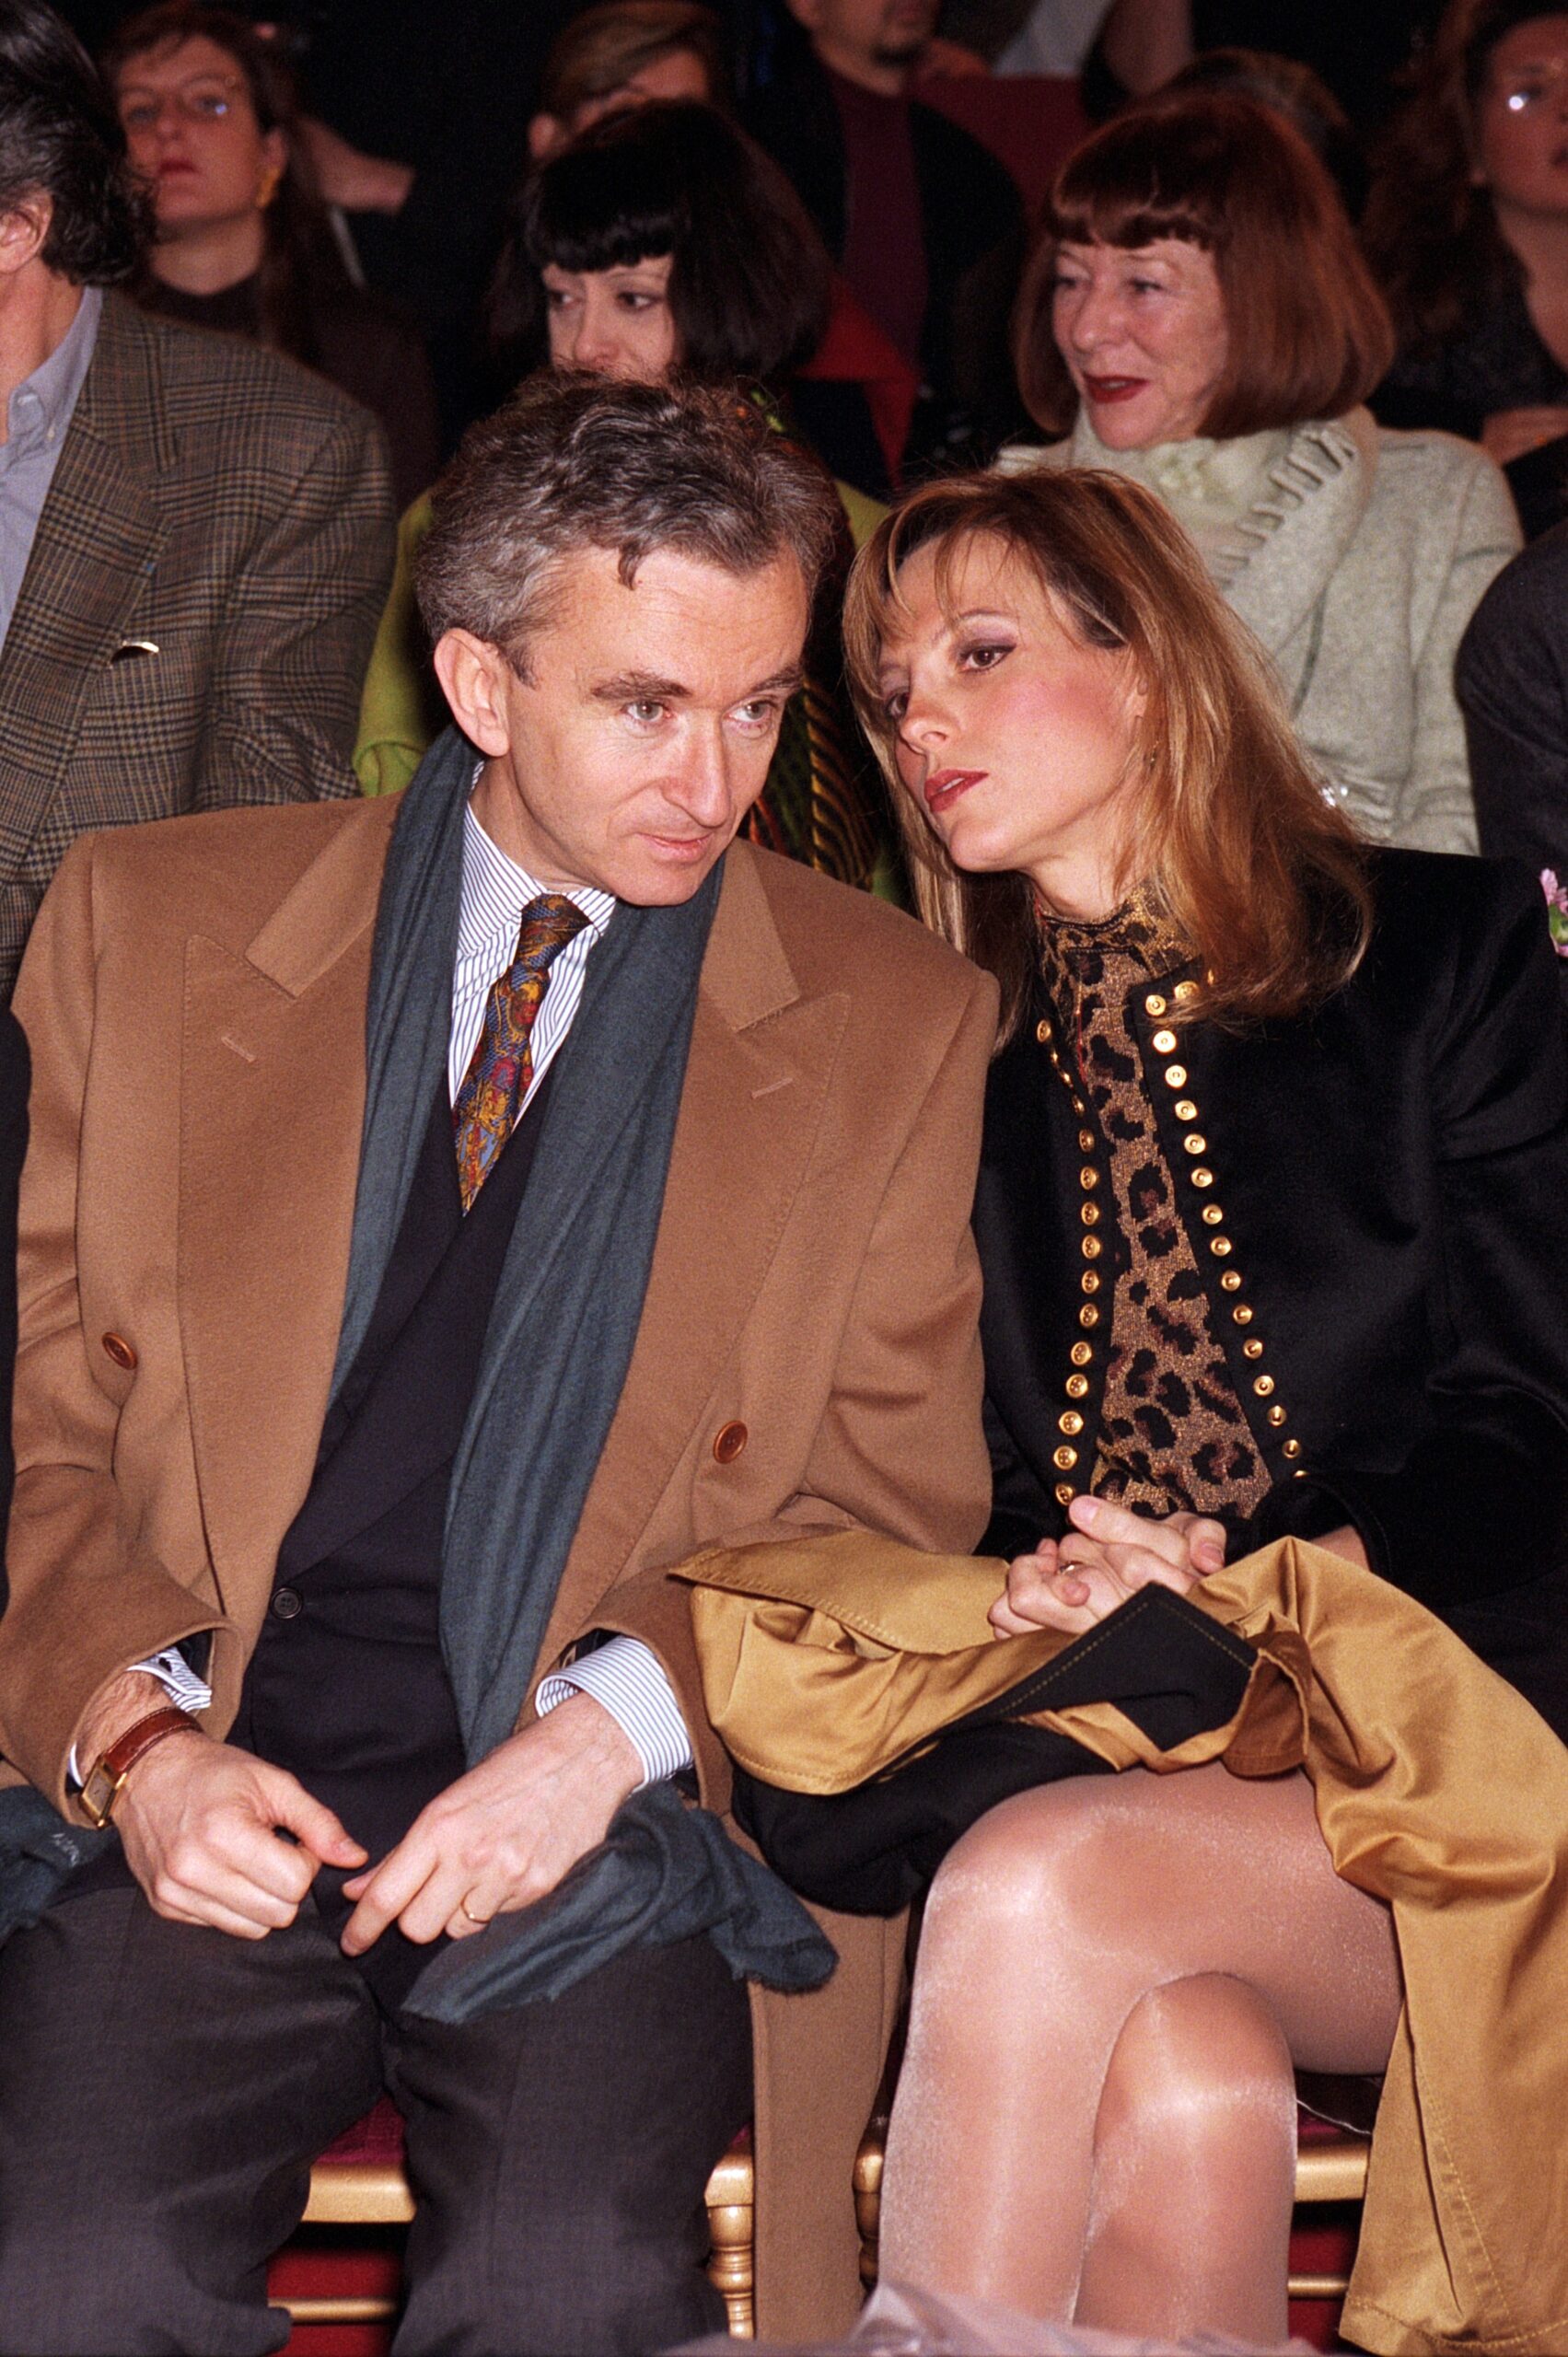 Bernard Arnault wearing a camel colored coat and gray suit  sat next to his wife